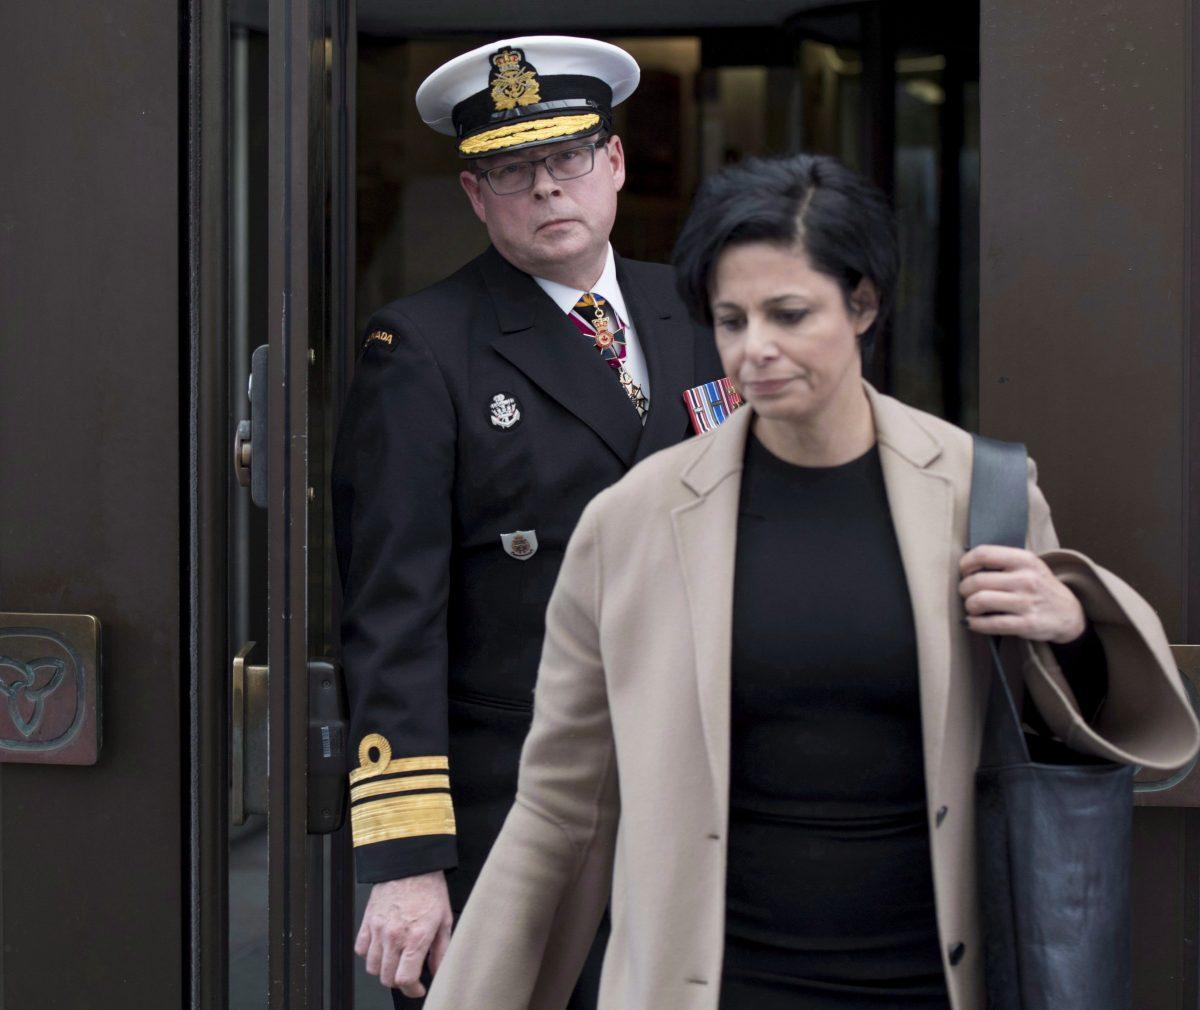 Vice-Admiral Mark Norman and his lawyer Marie Henein leave the courthouse in Ottawa following his first appearance for his trial for breach of trust, on April 10, 2018. (Justin Tang/The Canadian Press)